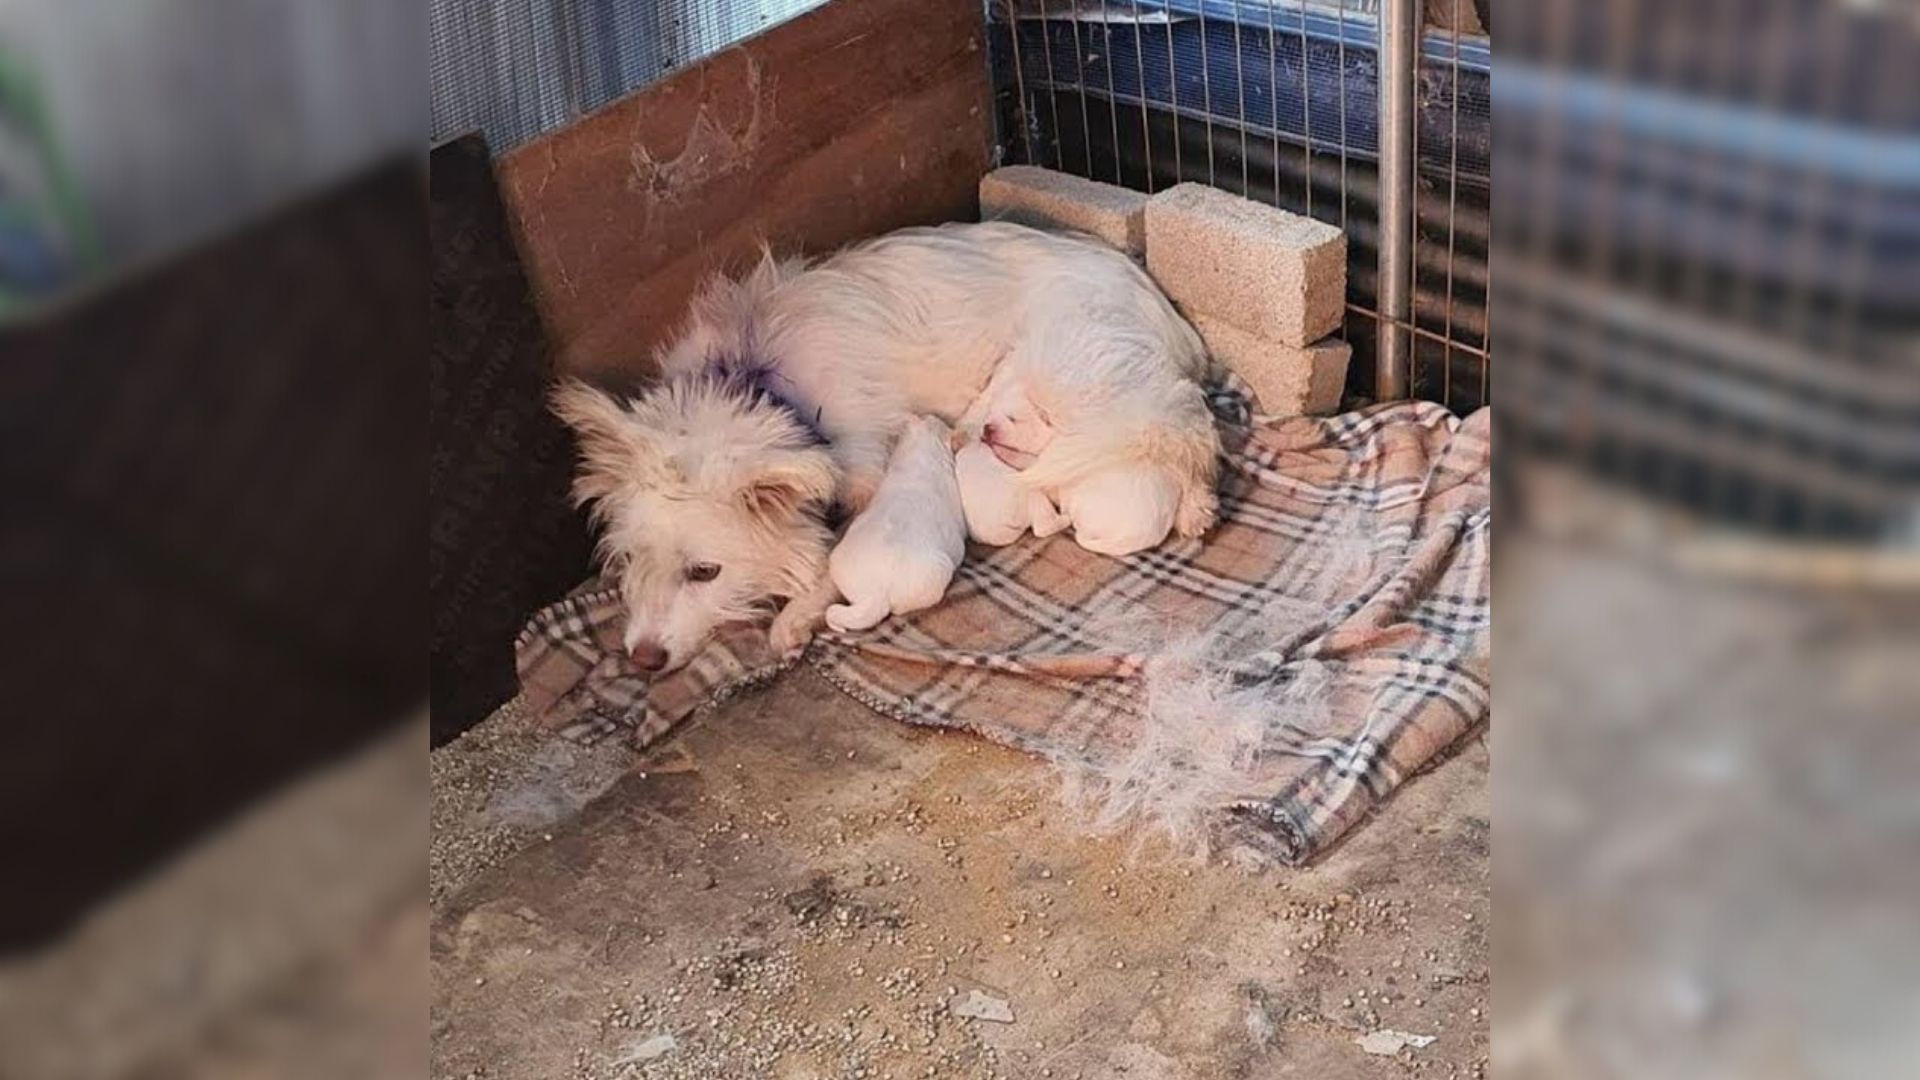 Mother Dog And Her Babies Were Trembling In The Cold Corner Of The Shelter Until She Came